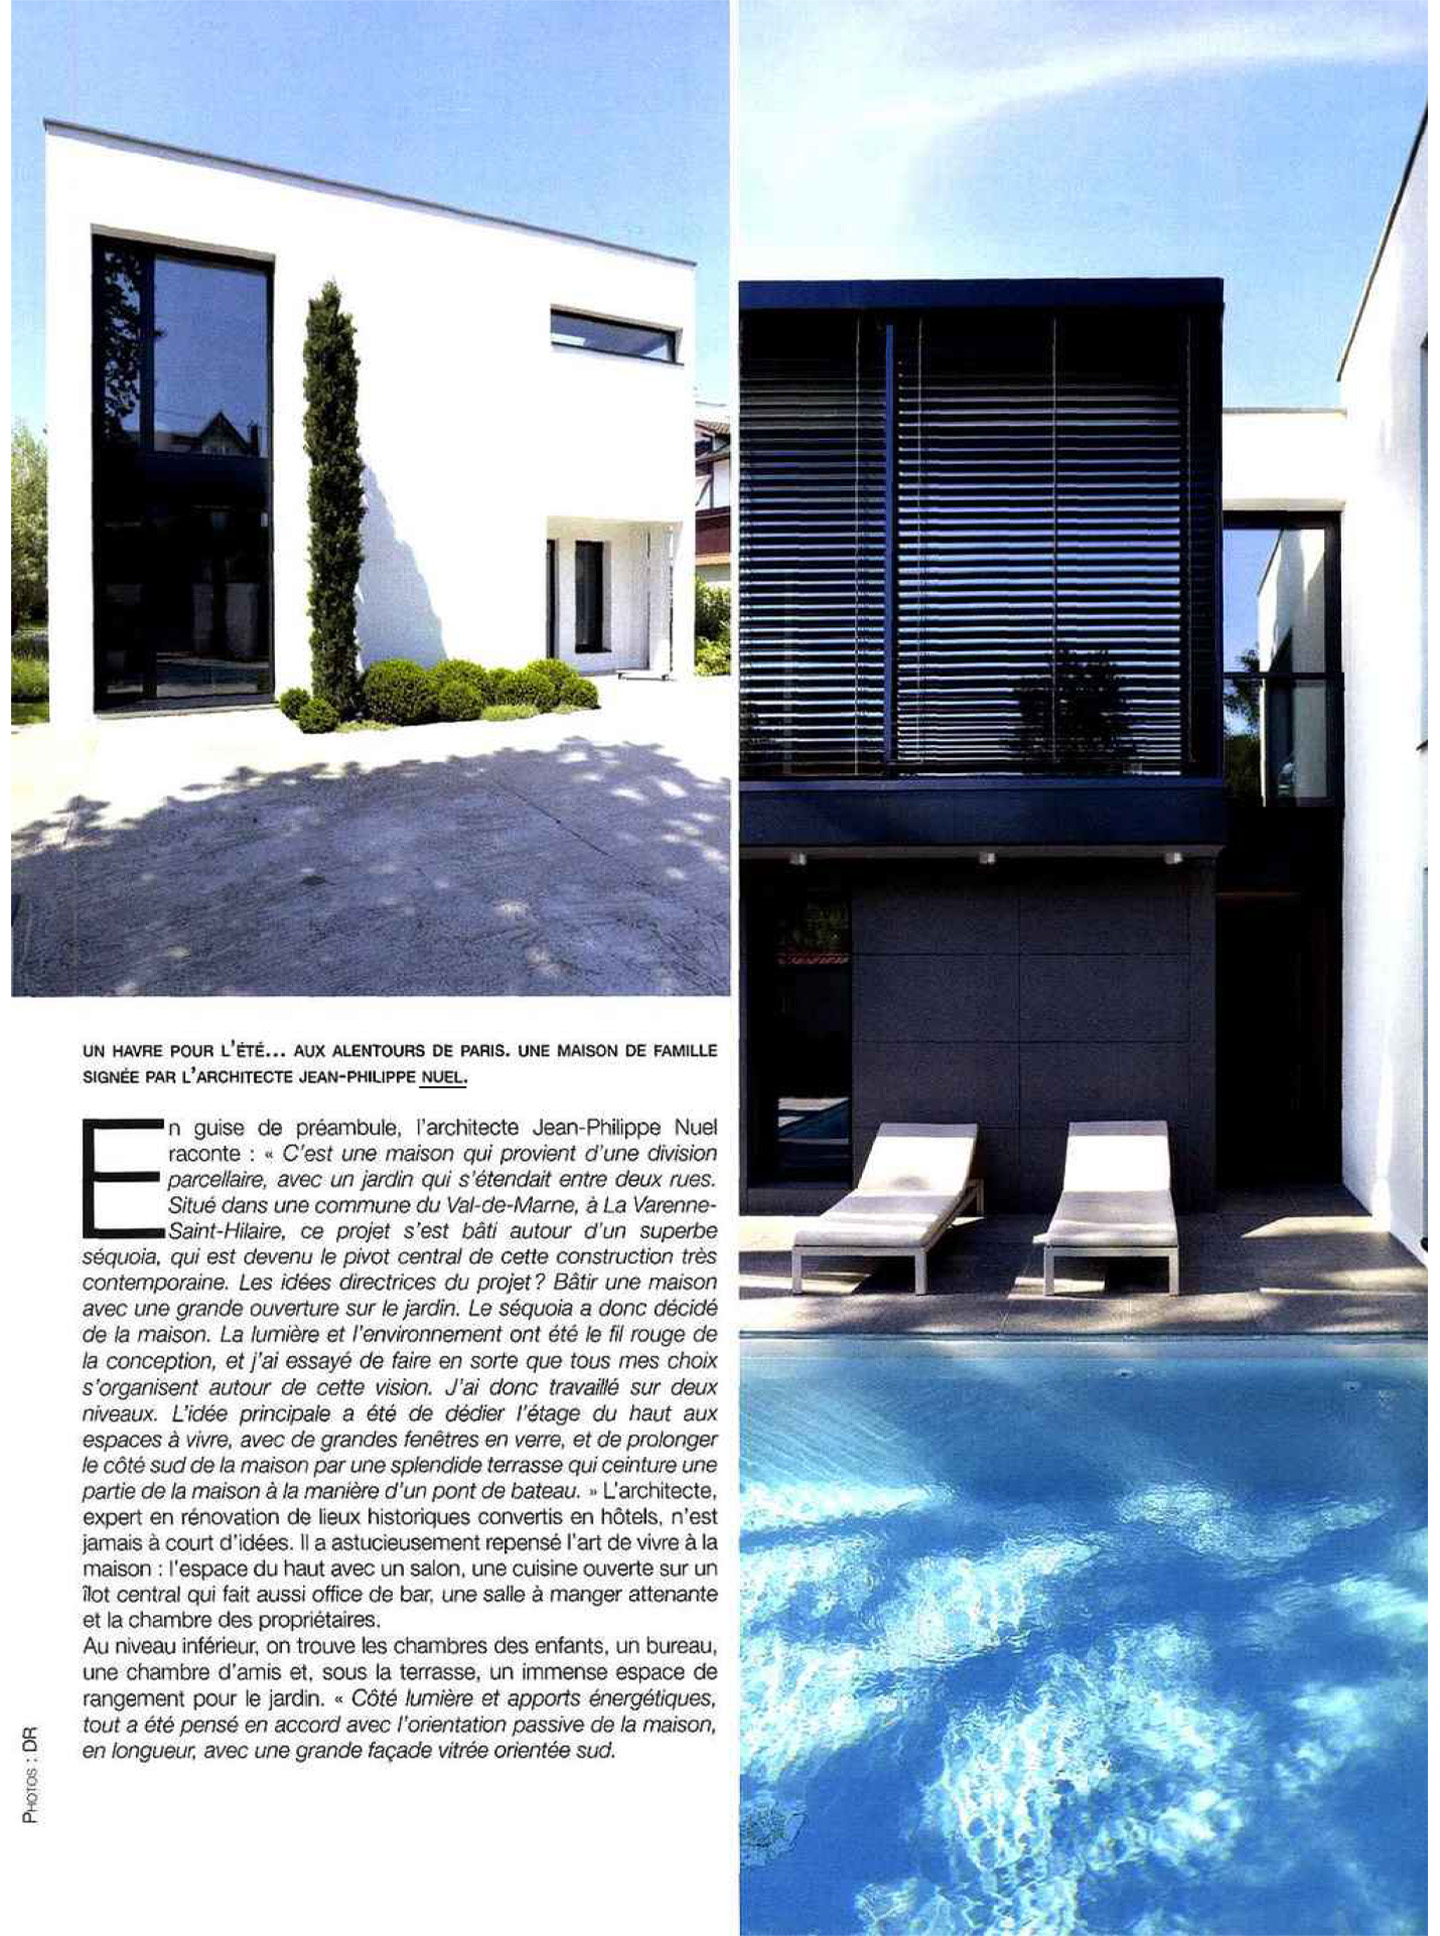 article on the private villa varenne realized by the interior design studio jean-philippe nuel in the magazine belles demeures